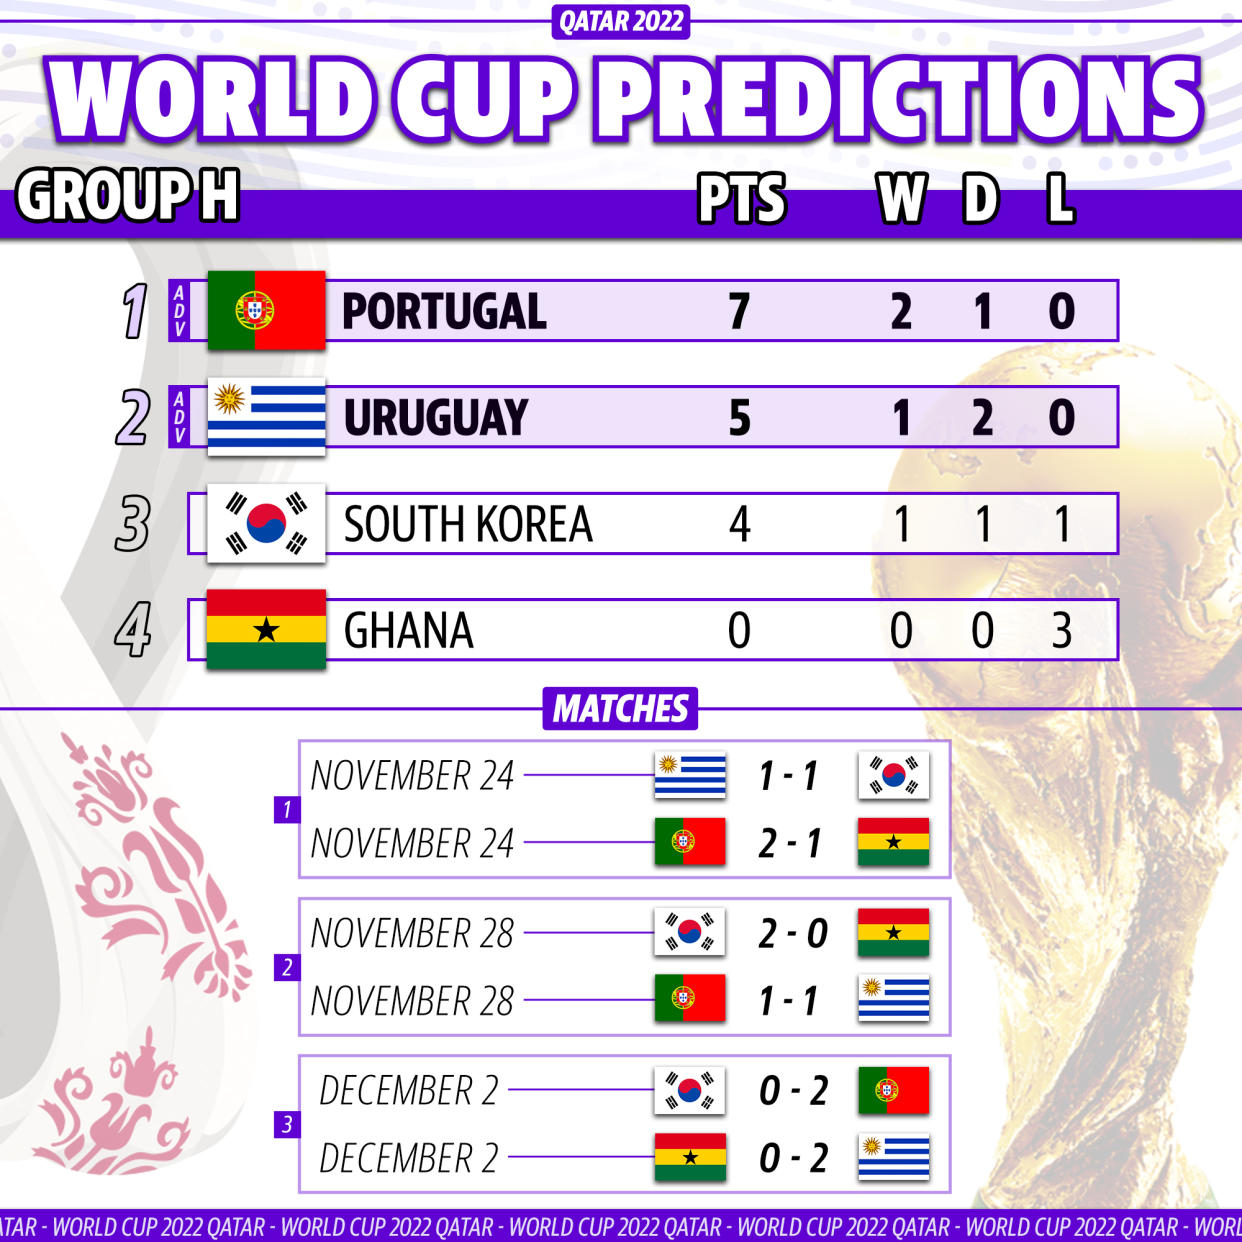 Yahoo Sports soccer writer Henry Bushnell's prediction for how Group H plays out at the 2022 World Cup. (Graphic by Michael Wagstaffe/Yahoo Sports)